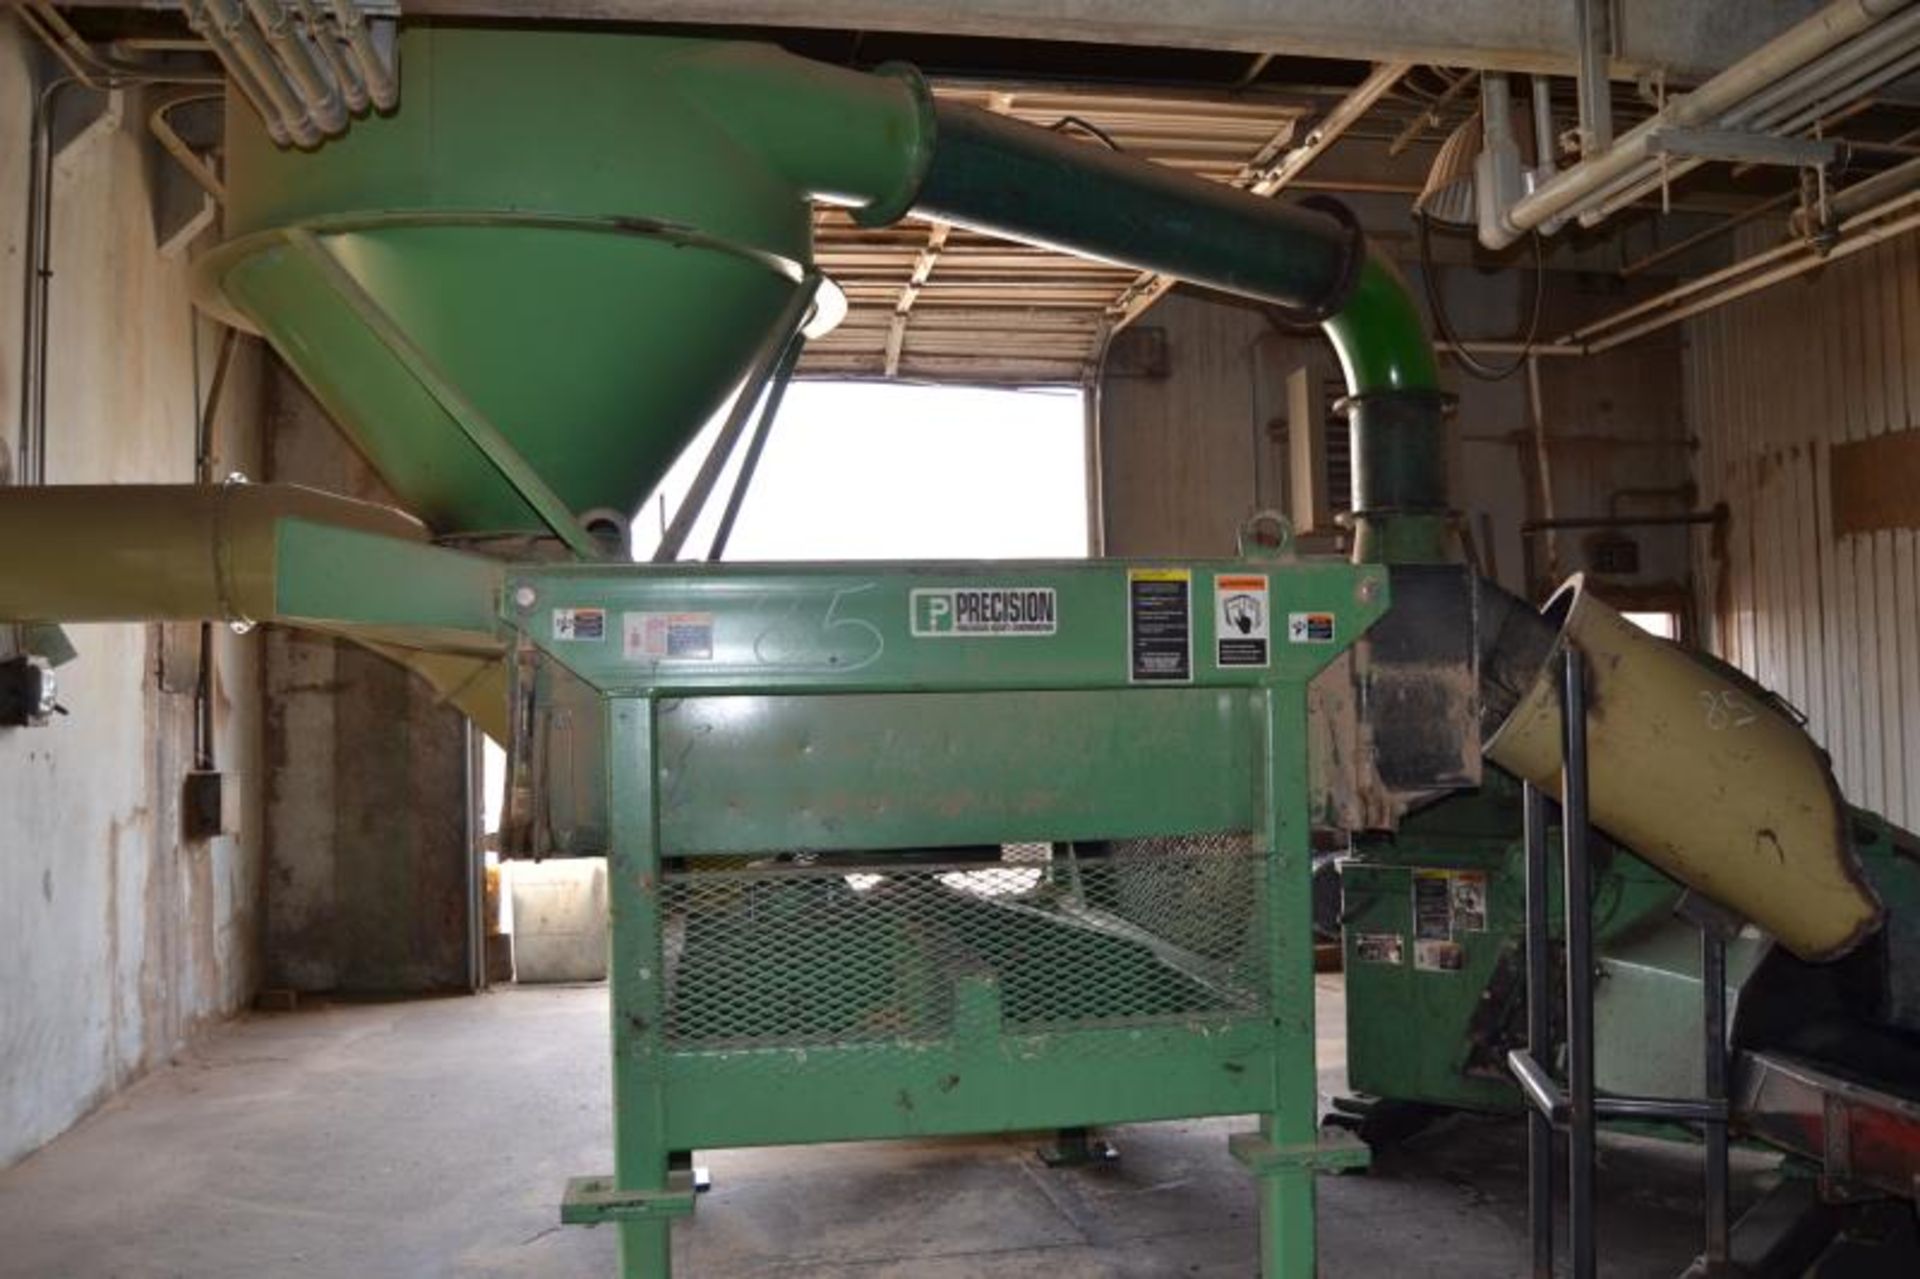 "PRECISION 58" 6 KNIFE CHIPPER SN# 2804-W/HORIZONTAL FEED TOP DISCHARGE; W/PRECISION 6'X6' CHIP - Image 5 of 5